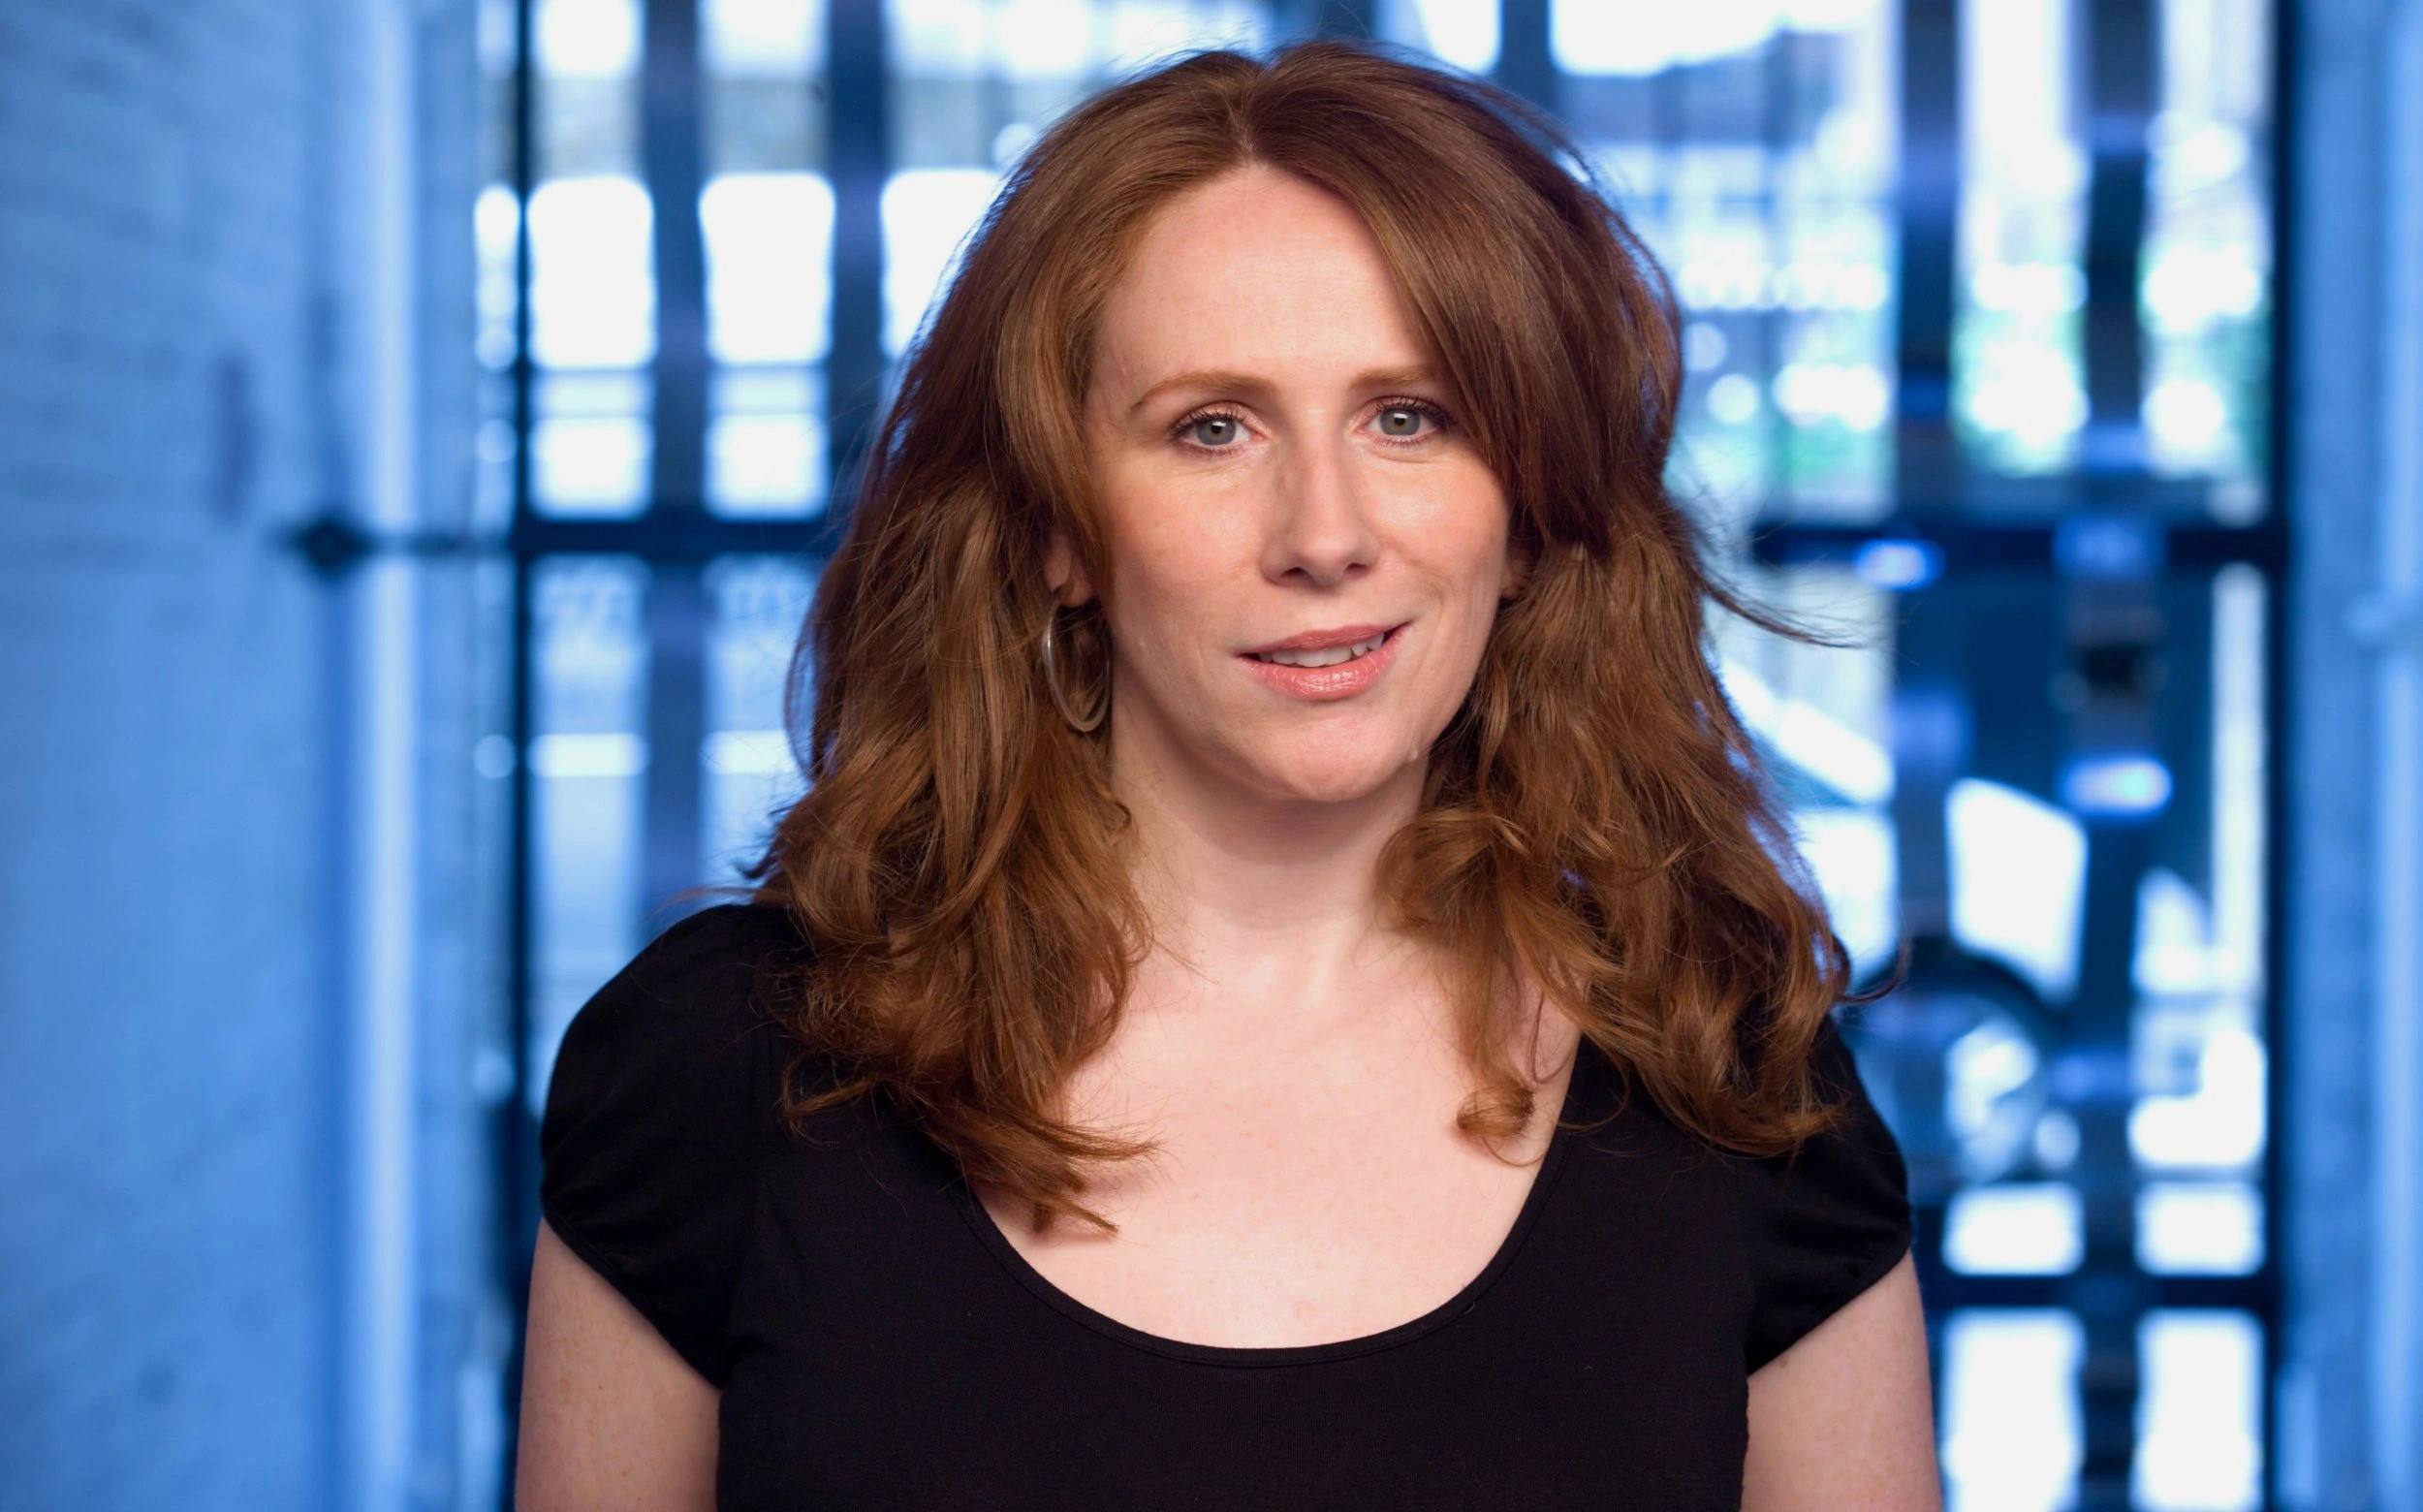 11 Intriguing Facts About Catherine Tate - Facts.net